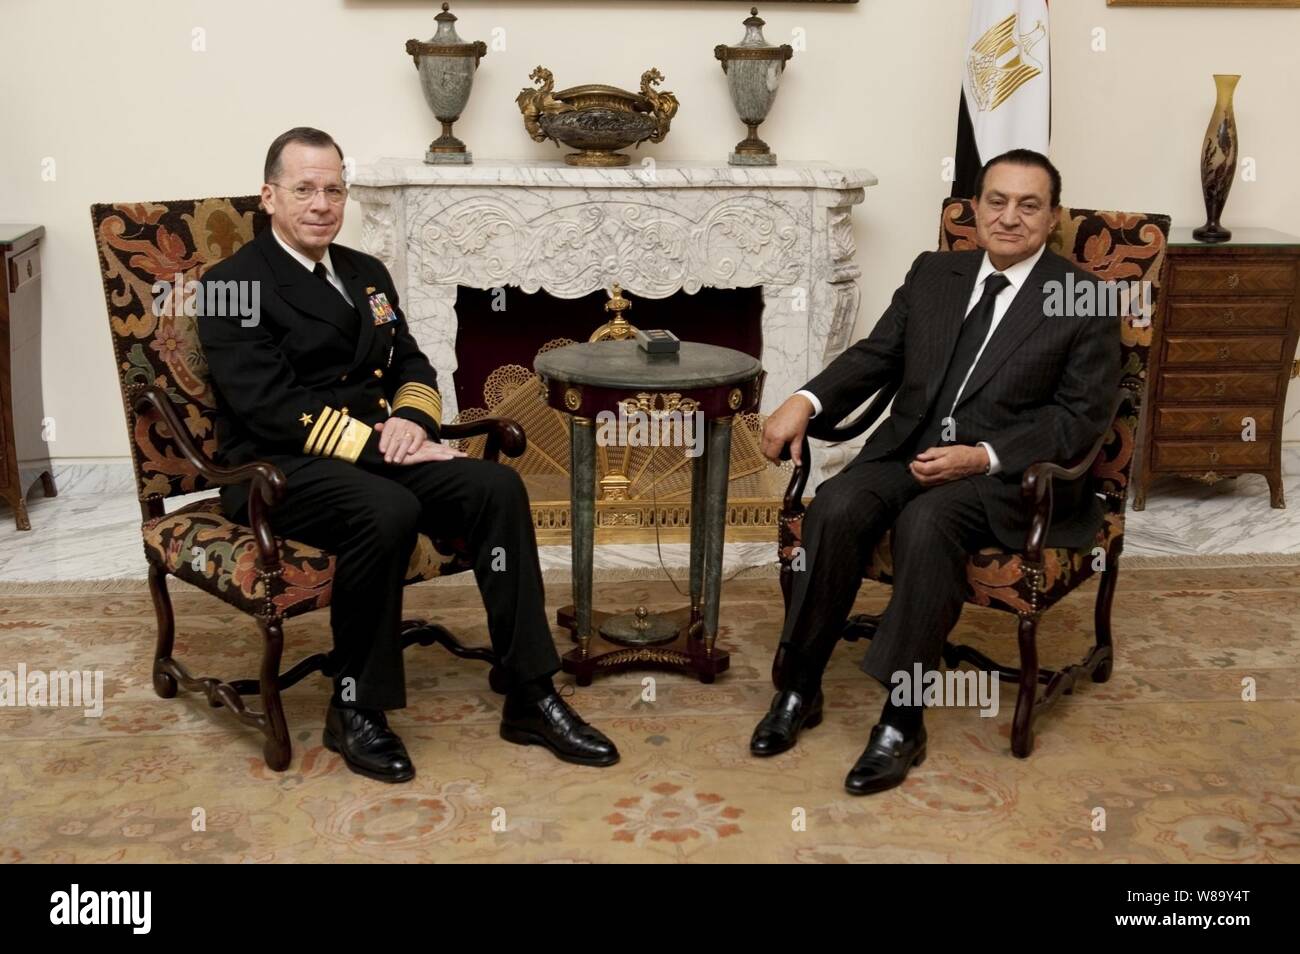 Chairman of the Joint Chiefs of Staff Adm. Mike Mullen, U.S. Navy, meets with Egyptian President Hosni Mubarak in Cairo on Feb. 14, 2010.  Mullen is on a weeklong tour of the region visiting with key partners and allies. Stock Photo